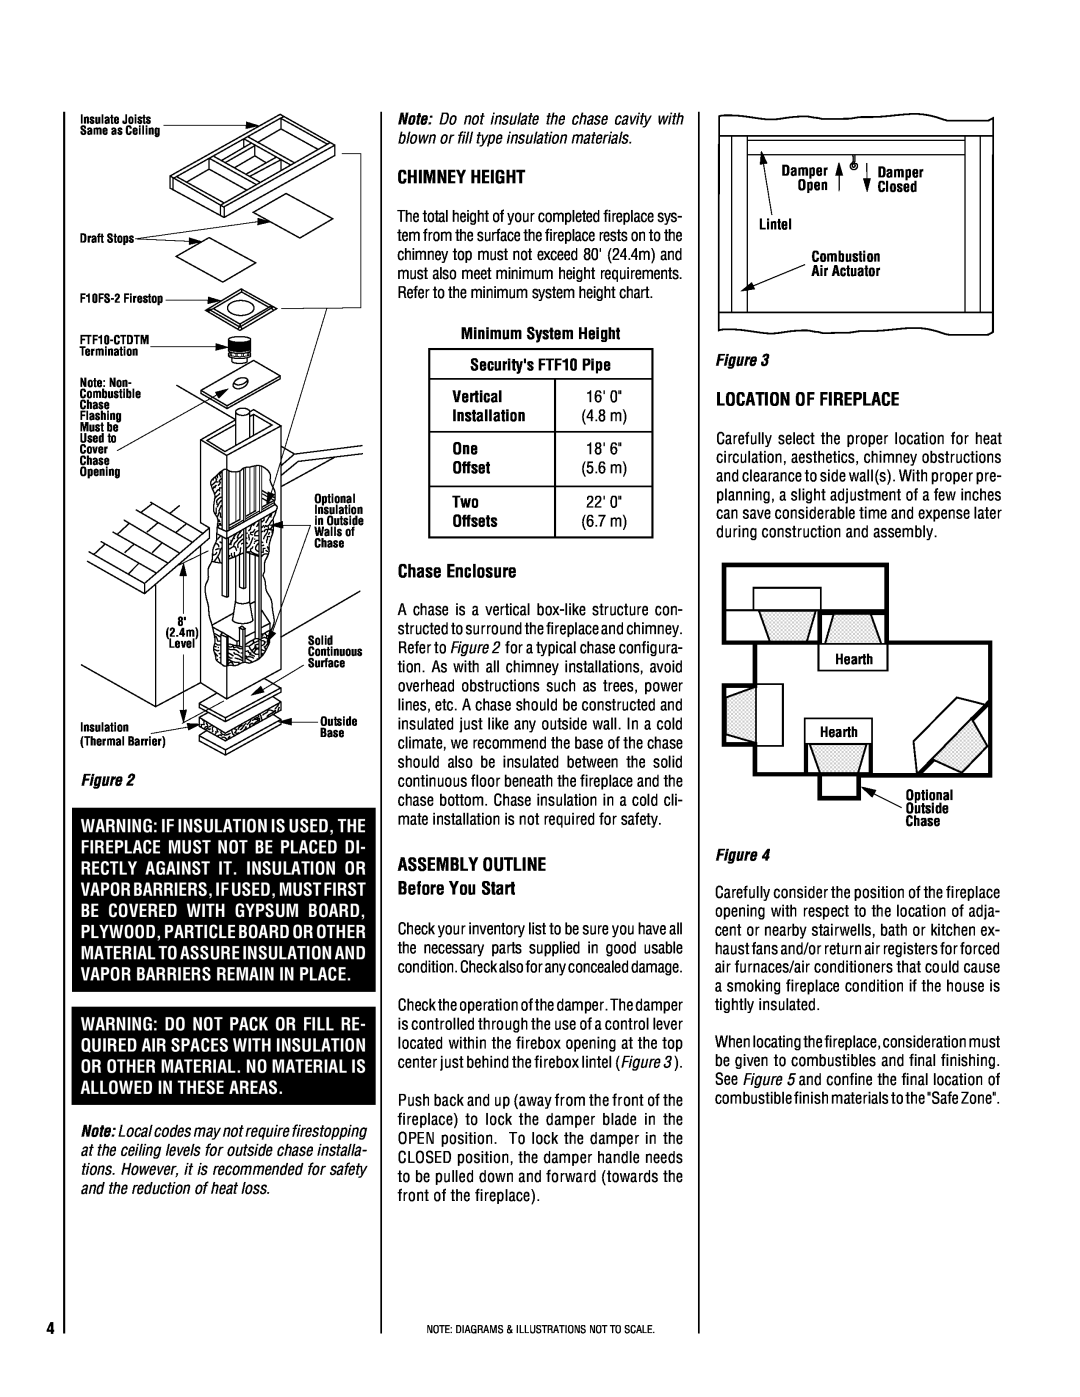 Lucent Technologies TM-4500 Chimney Height, Chase Enclosure, Location Of Fireplace, ASSEMBLY OUTLINE Before You Start 